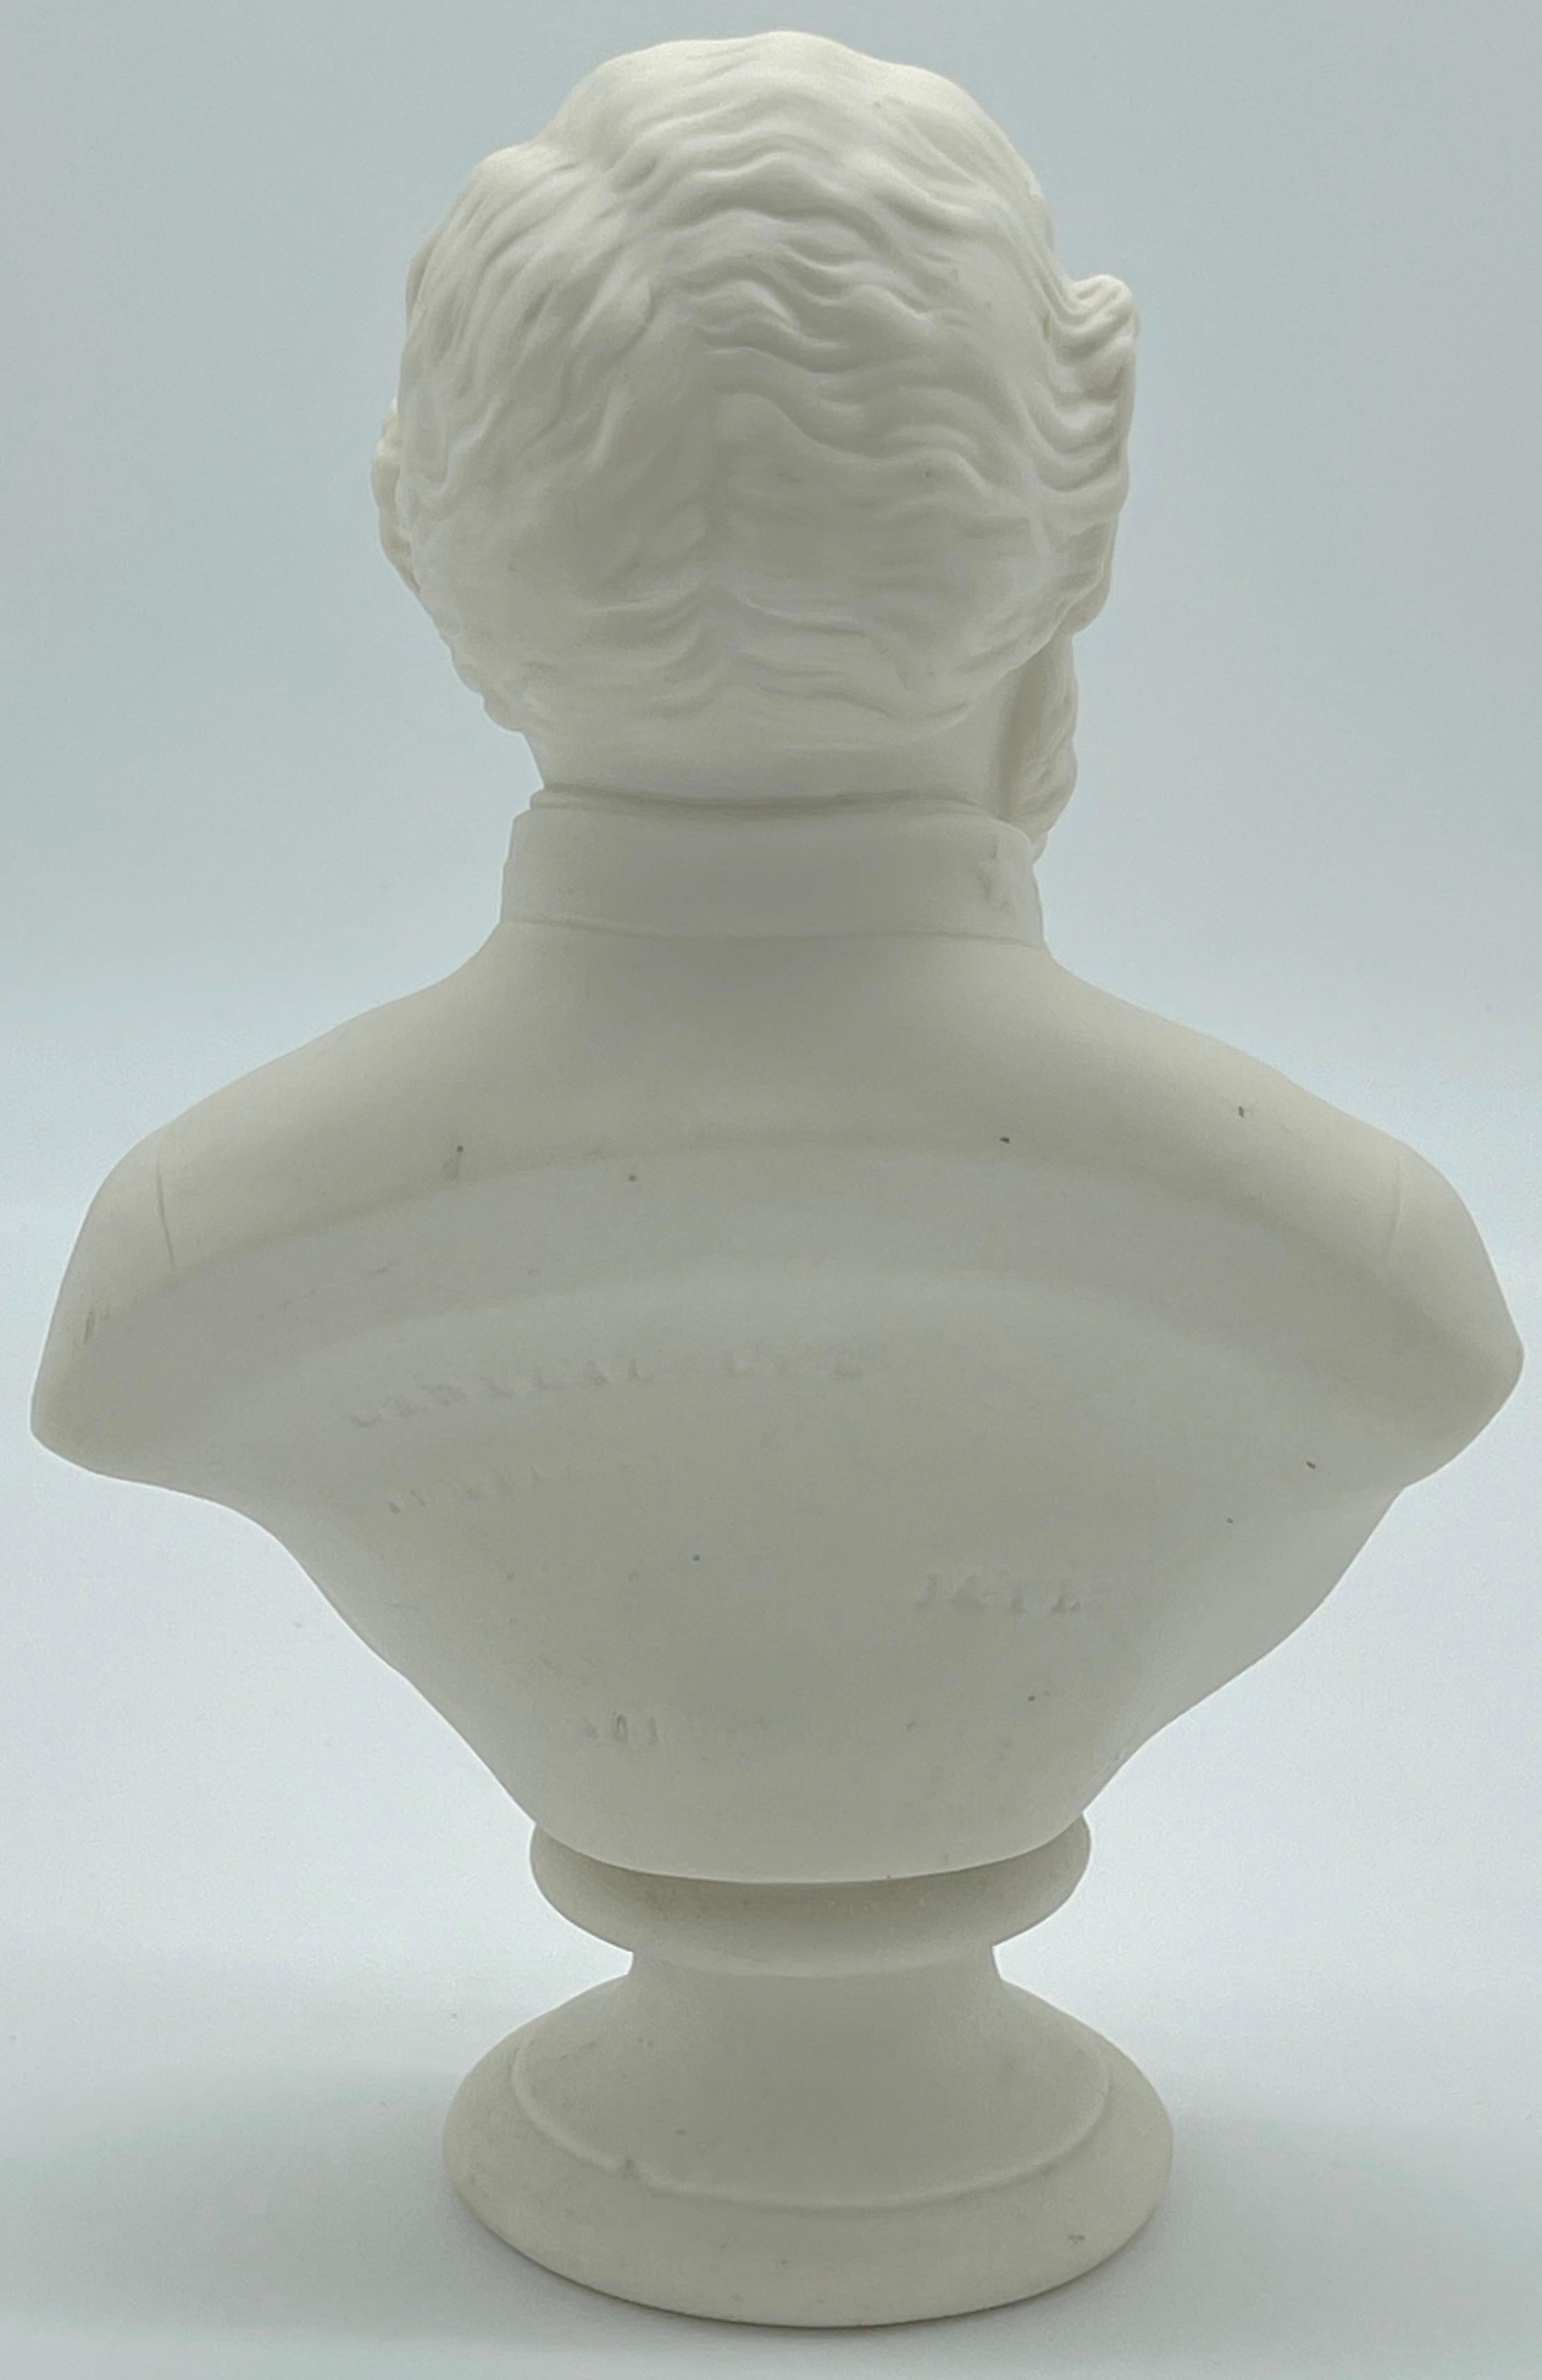 Parian Bust of Confederate General Robert E. Lee on Carved Neoclassical Base 5